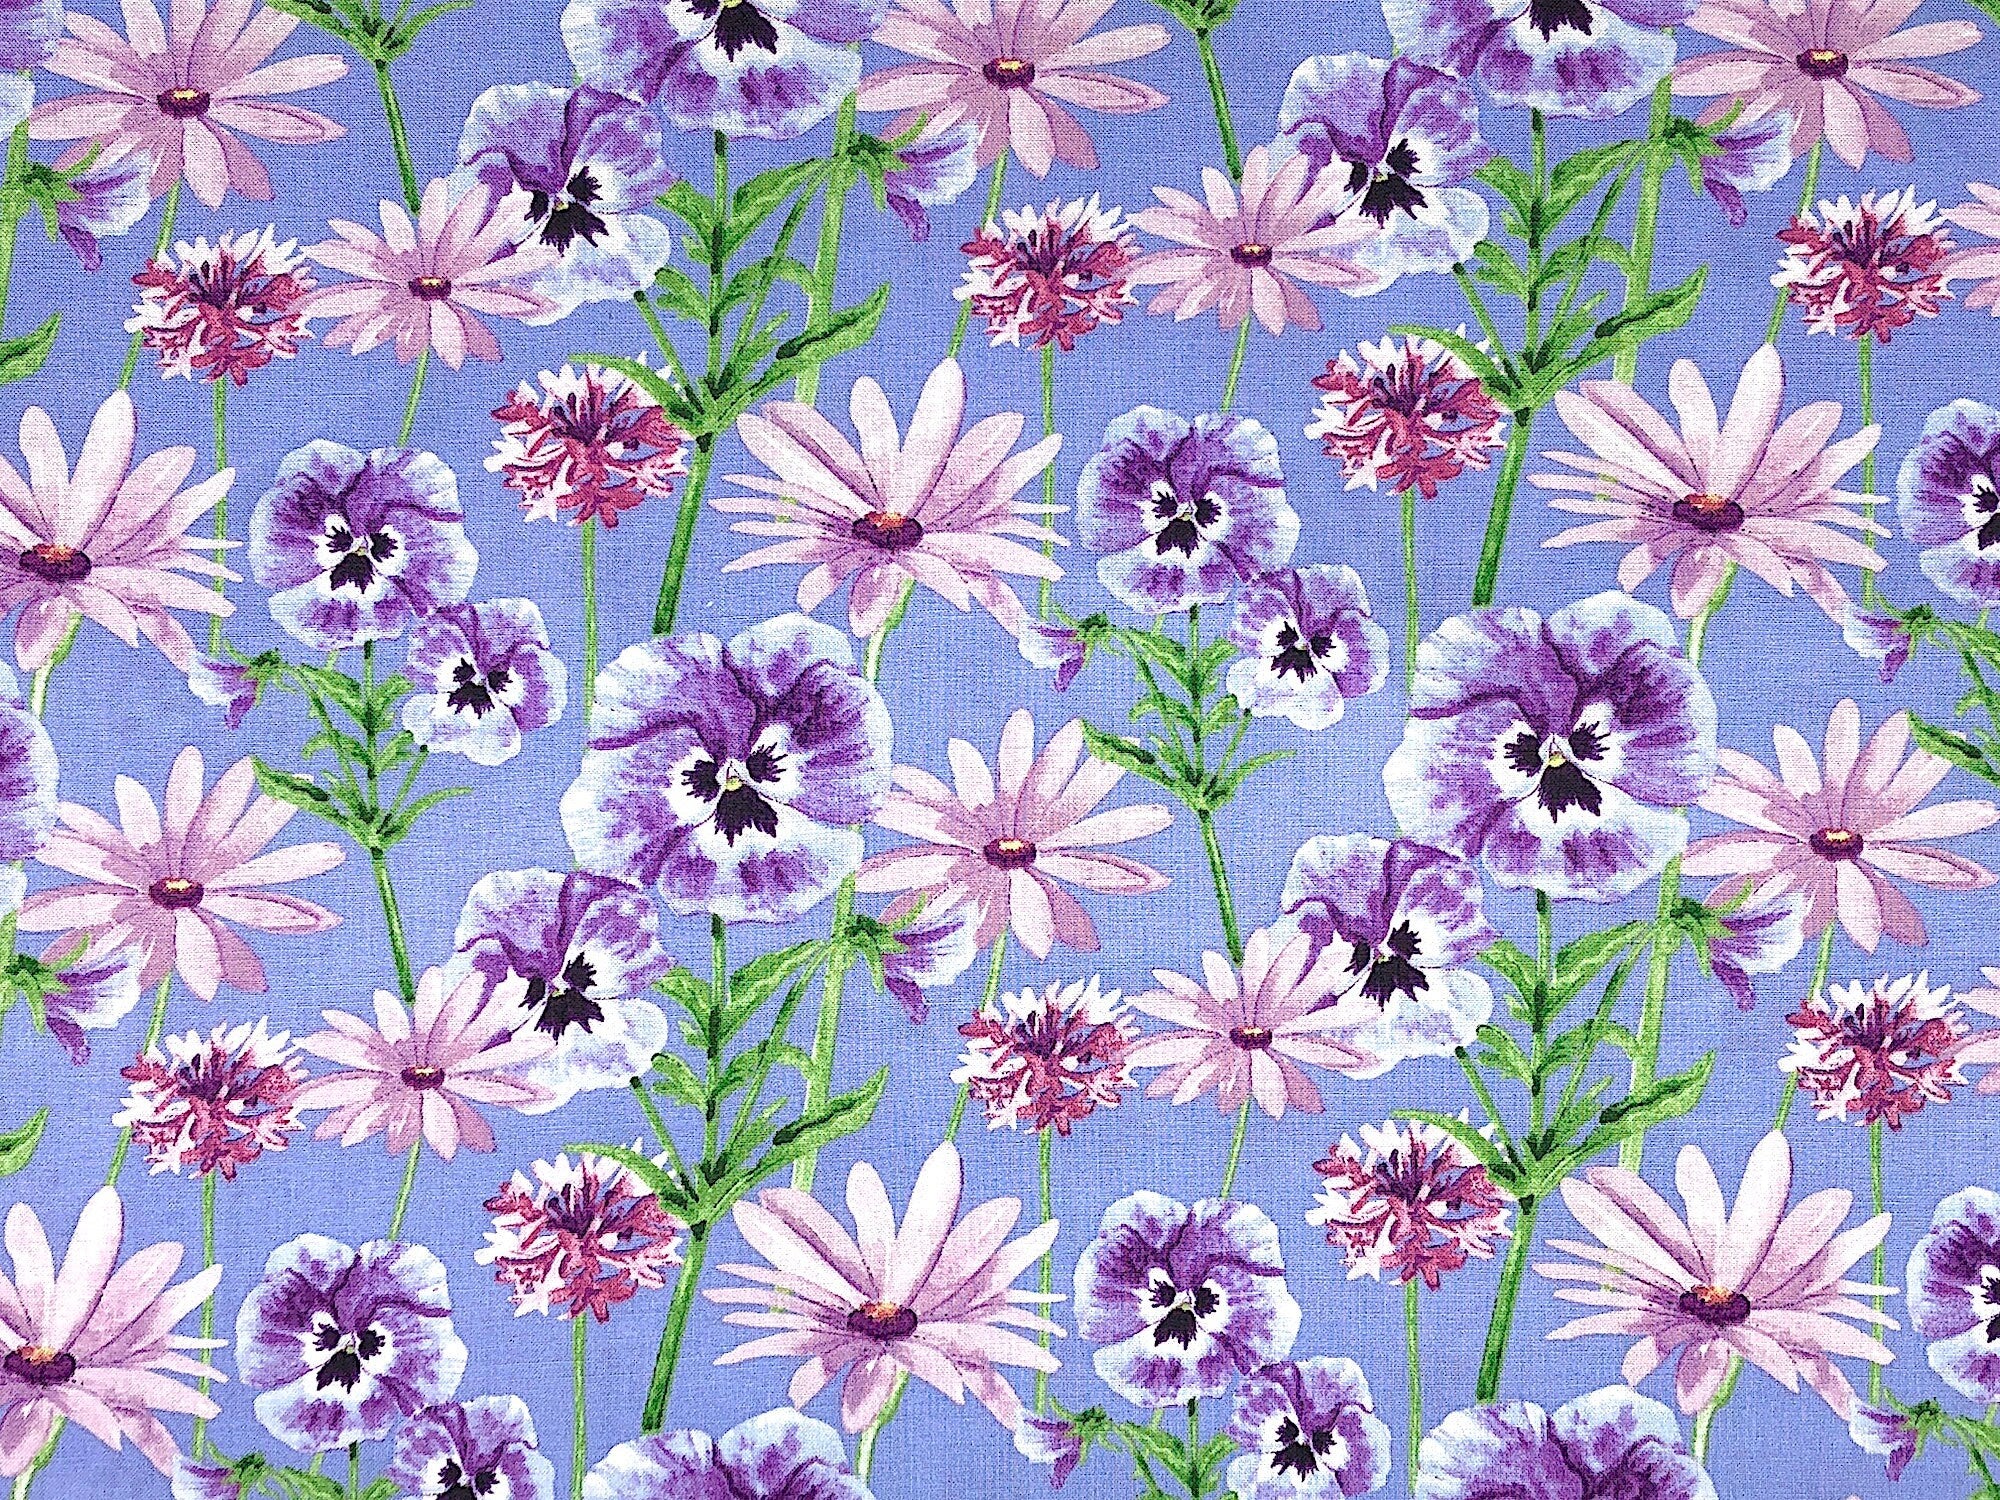 This flower fabric is covered with lavender and purple pansies and pink flowers